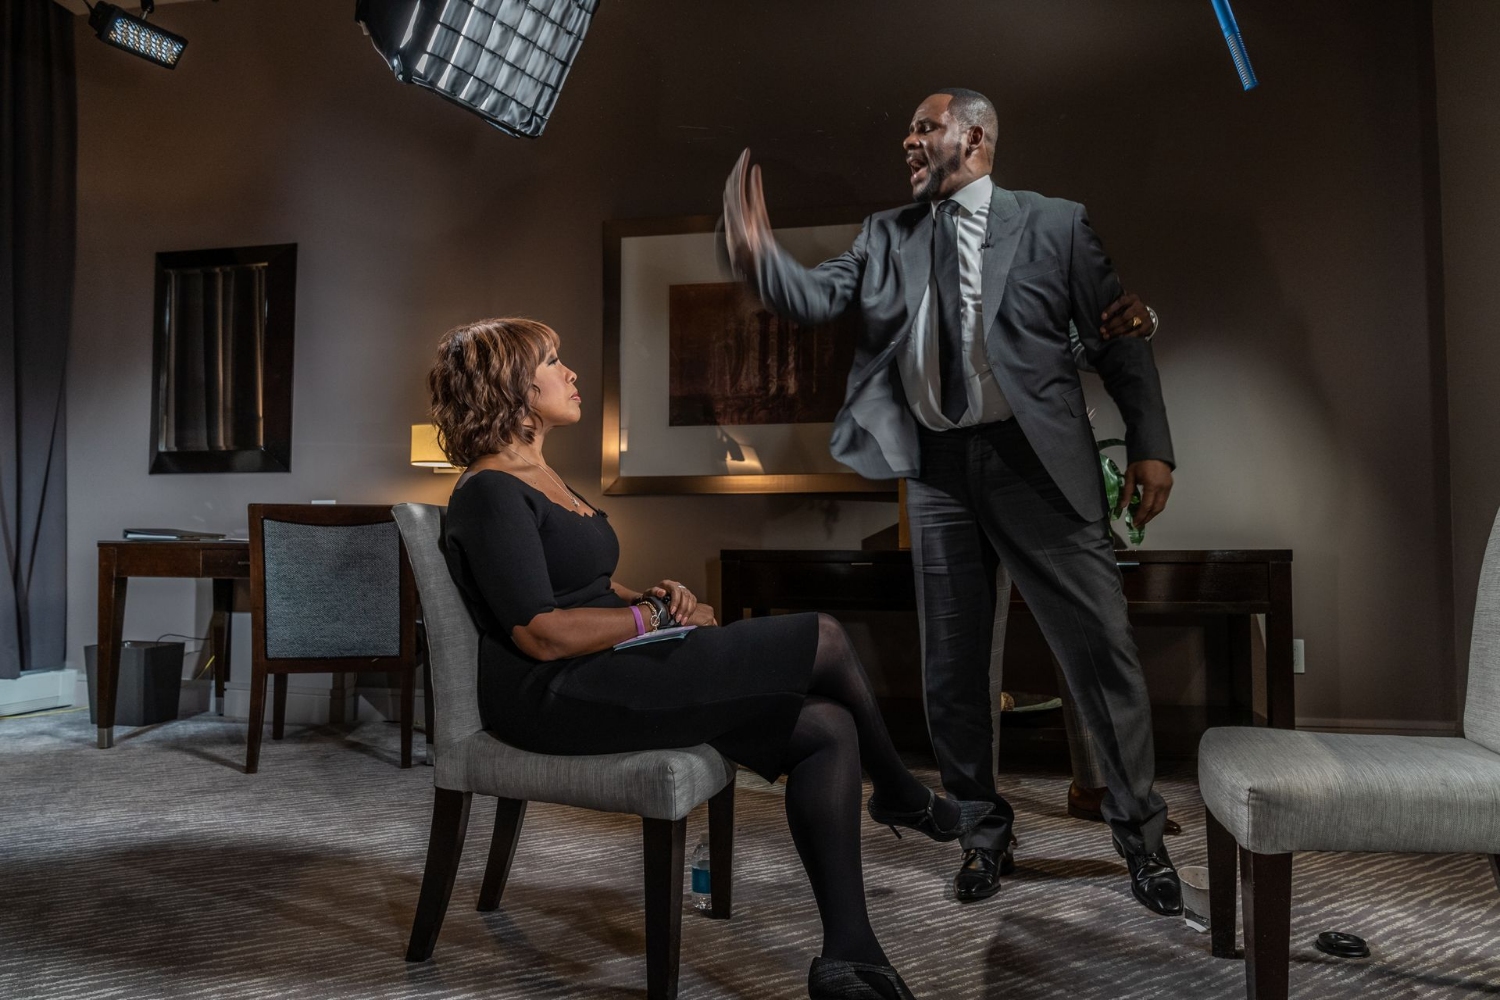 CBS THIS MORNING co-host Gayle King sat down with R&B singer R. Kelly Tuesday in Chicago for his first television interview since he was arrested on 10 sexual abuse charges. Lazarus Jean-Baptiste, CBS This Morning